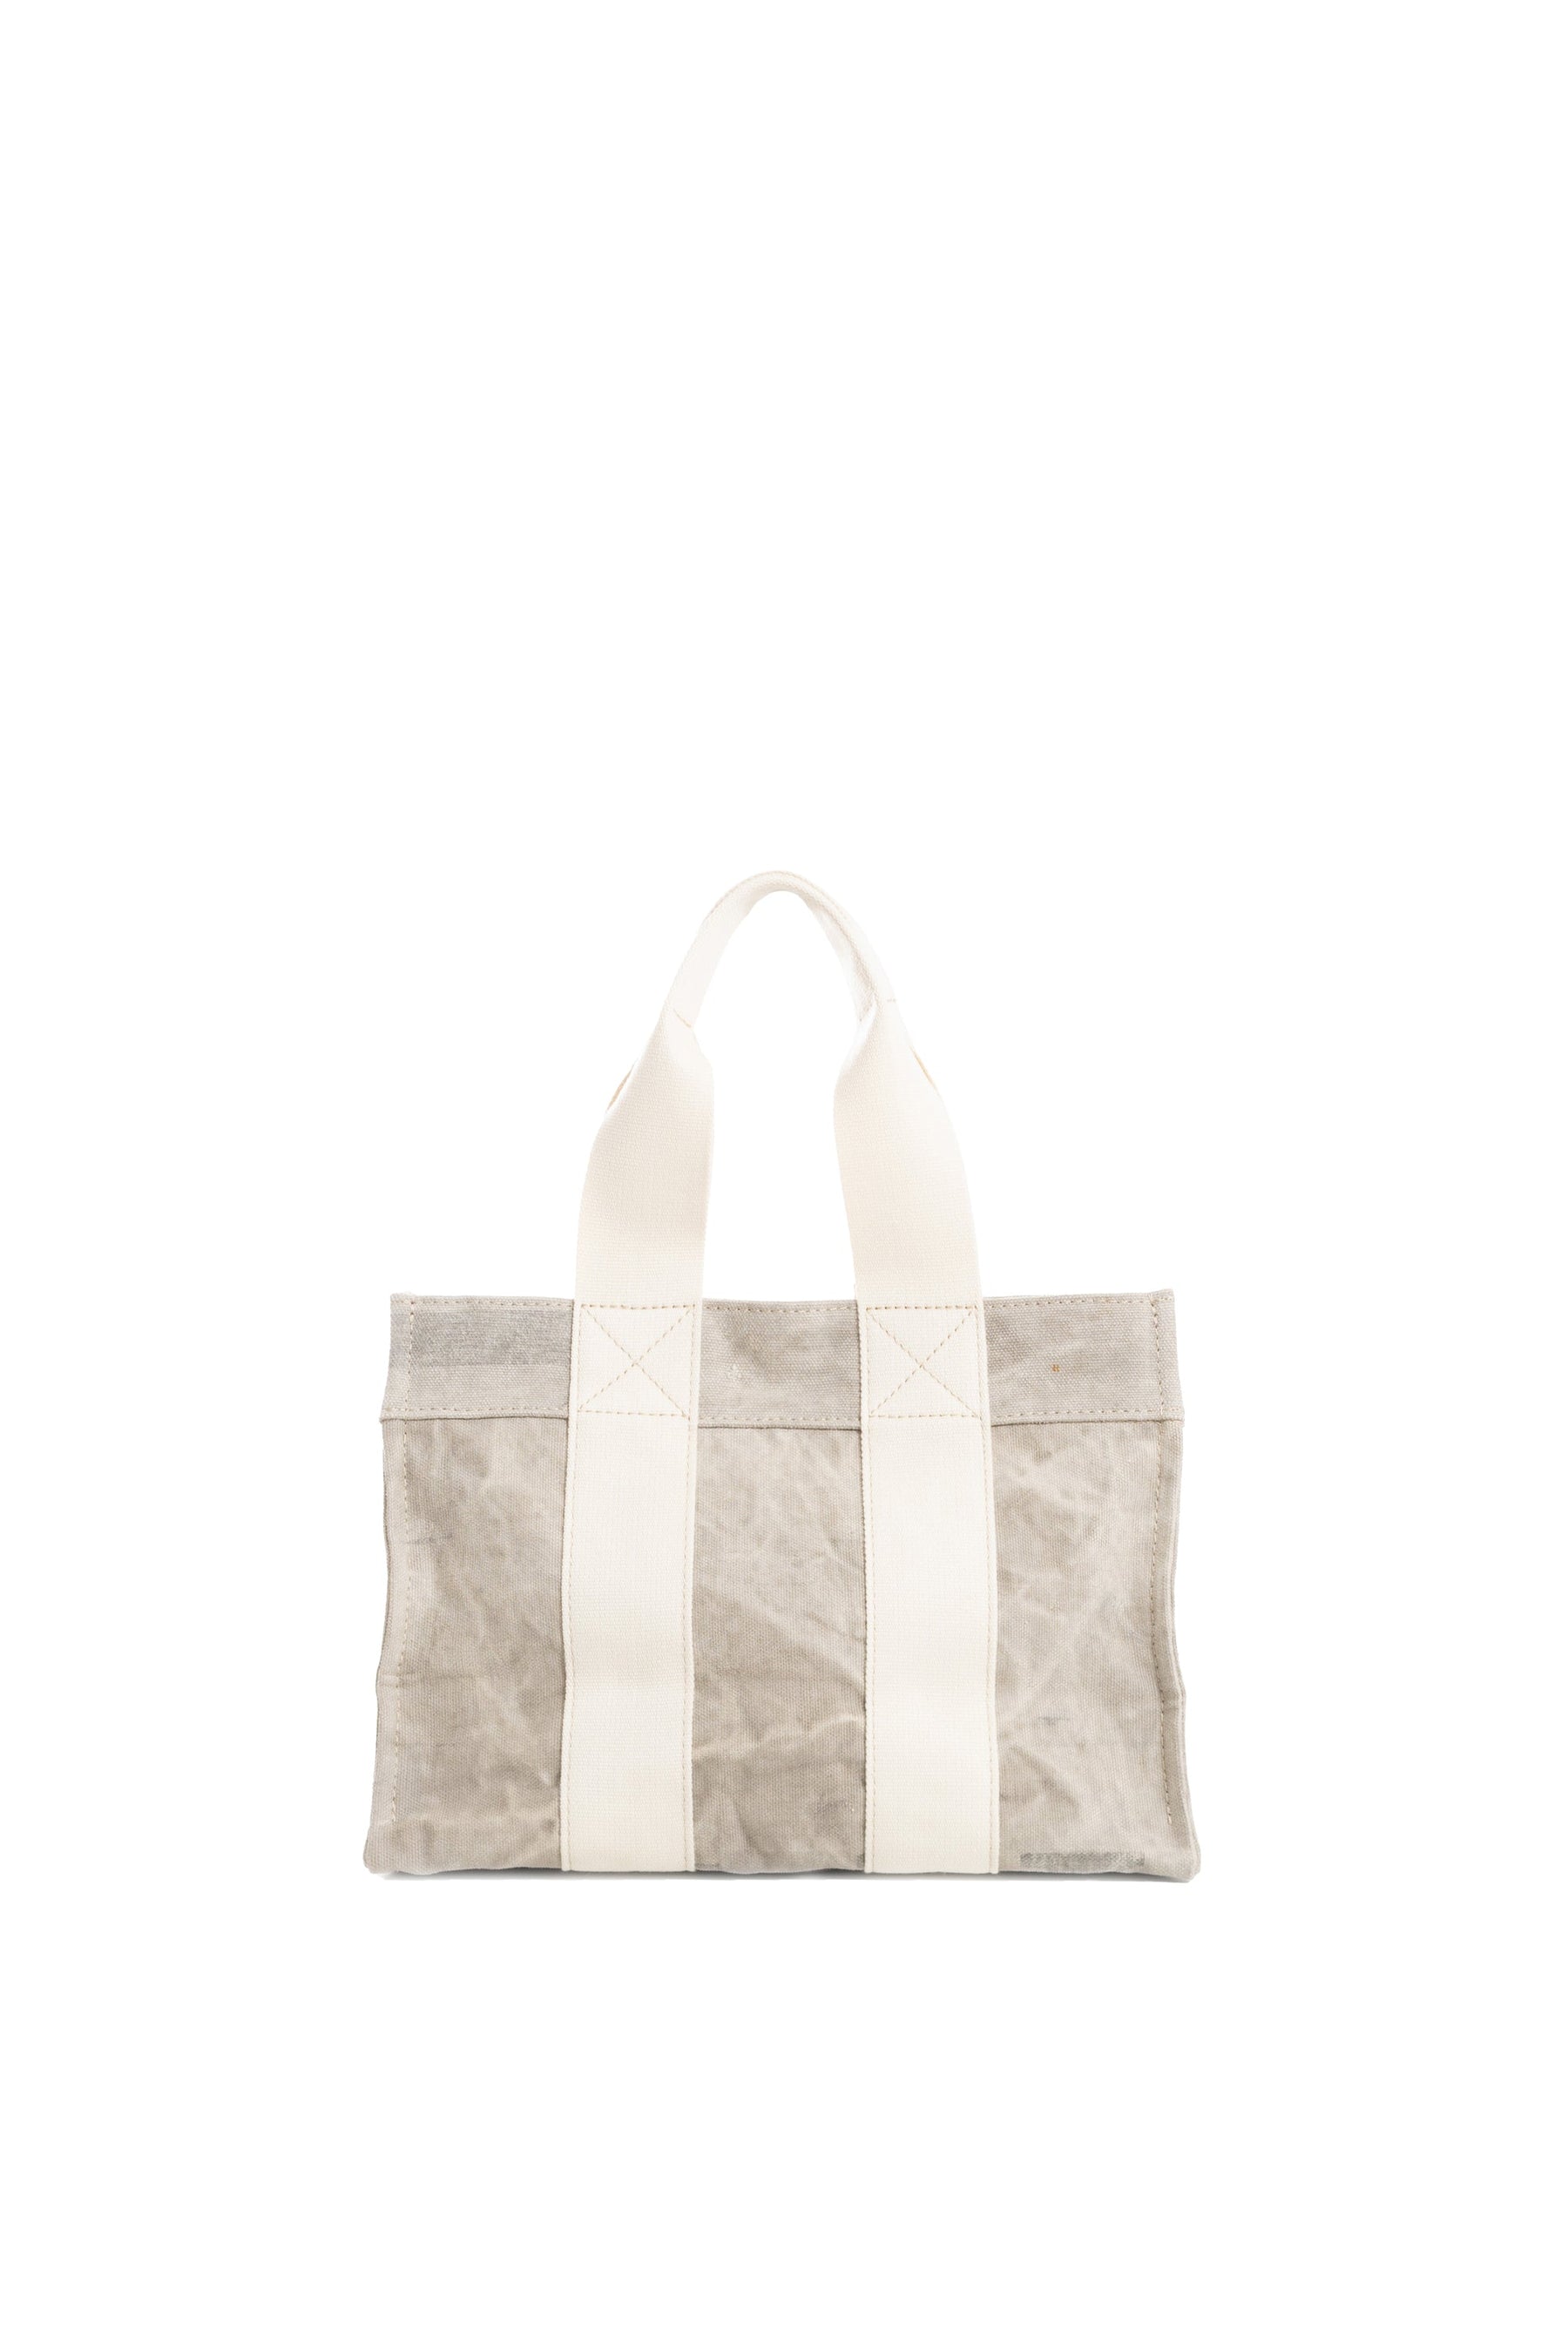 READYMADE レディメイド SS23 EASY TOTE SMALL / WHT -NUBIAN